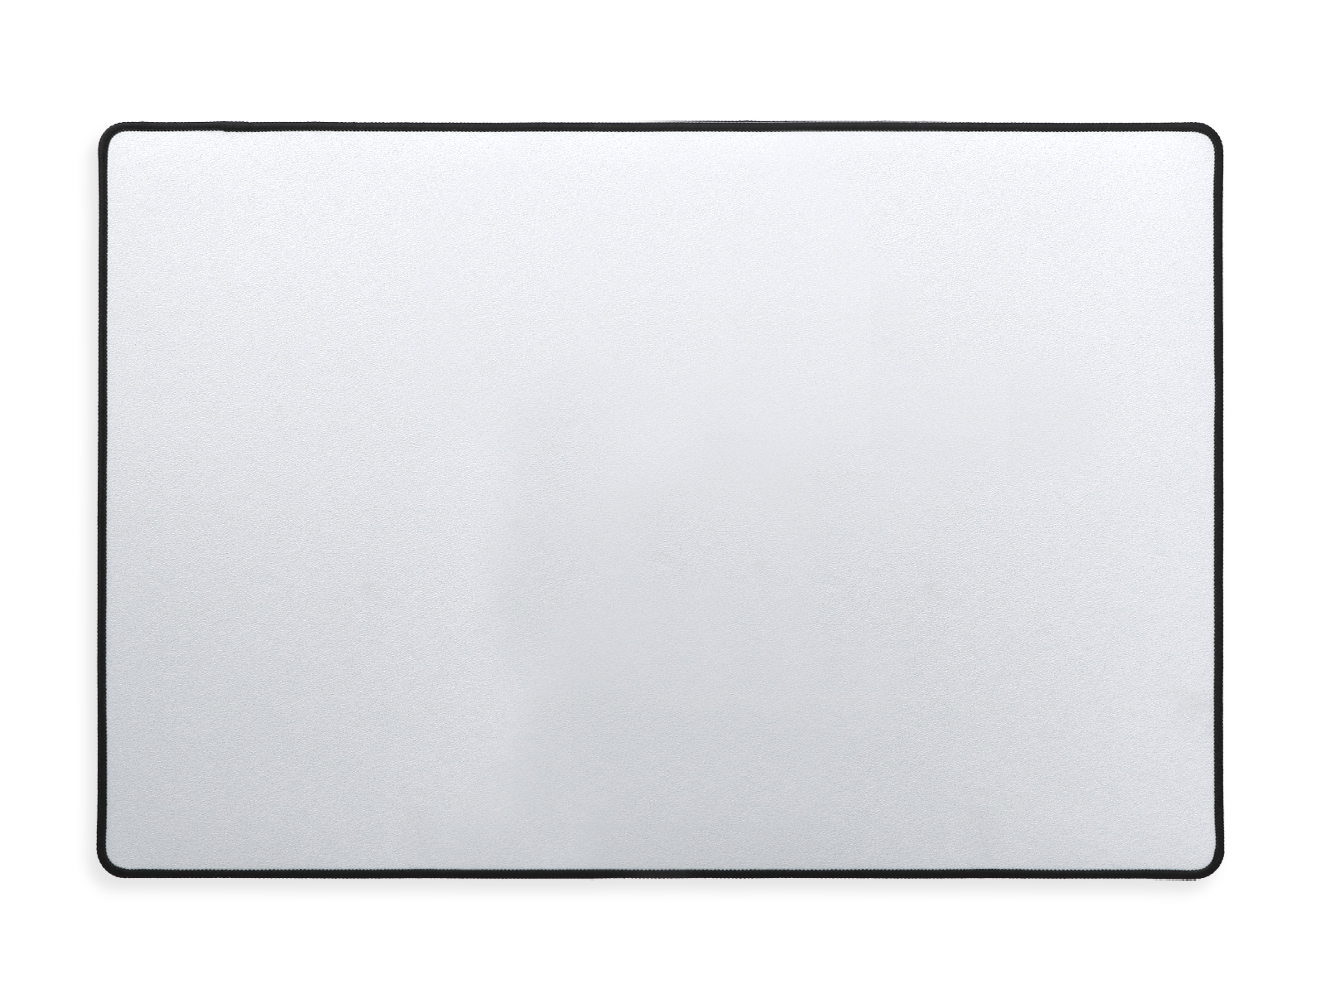 Sublimation Gaming Mouse Pad 800 x 400 x 3 mm - White